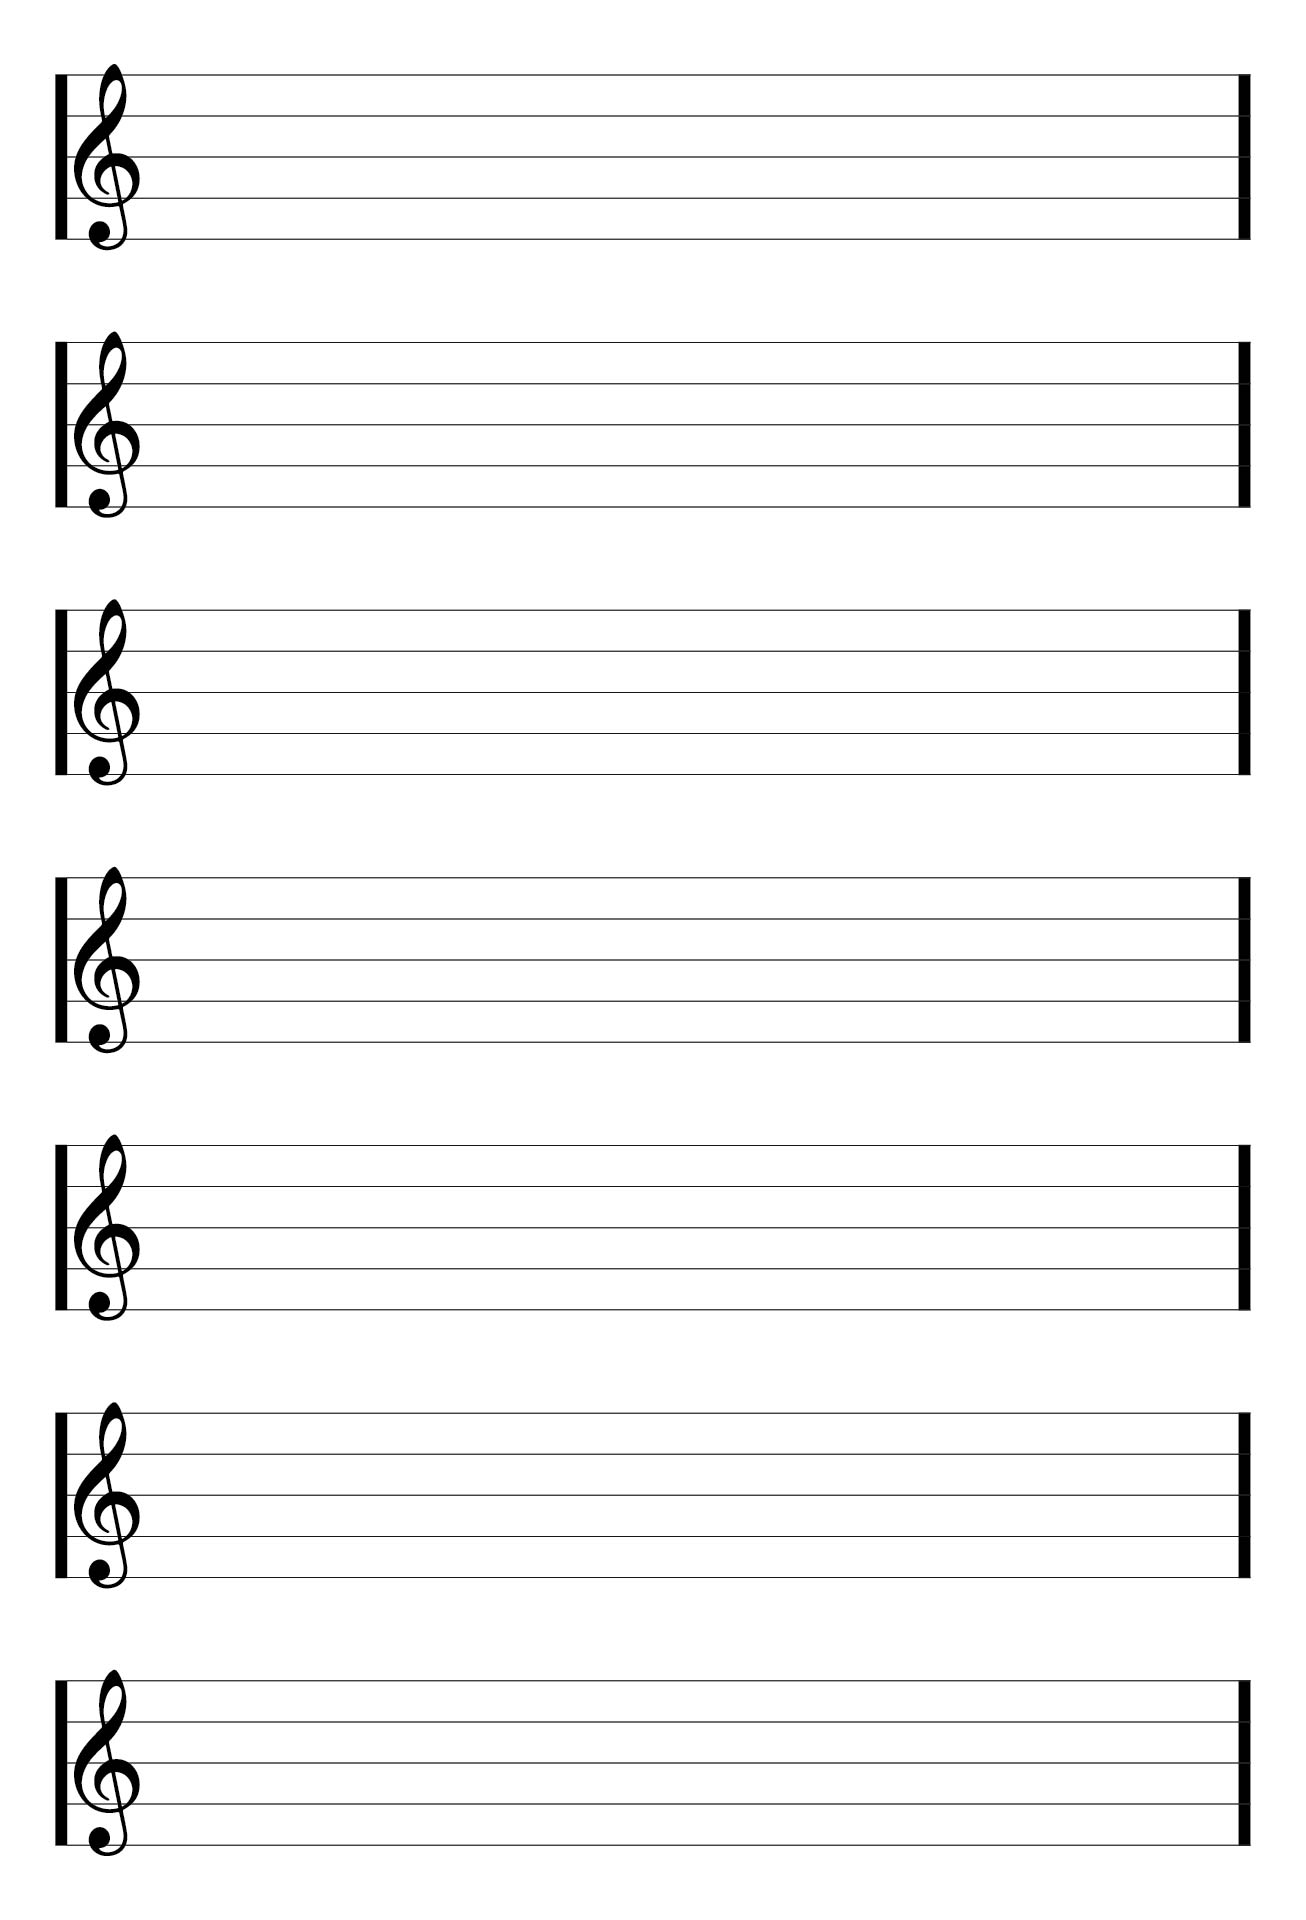 blank-staff-paper-to-print-and-share-with-your-students-for-more-free-music-teaching-resources